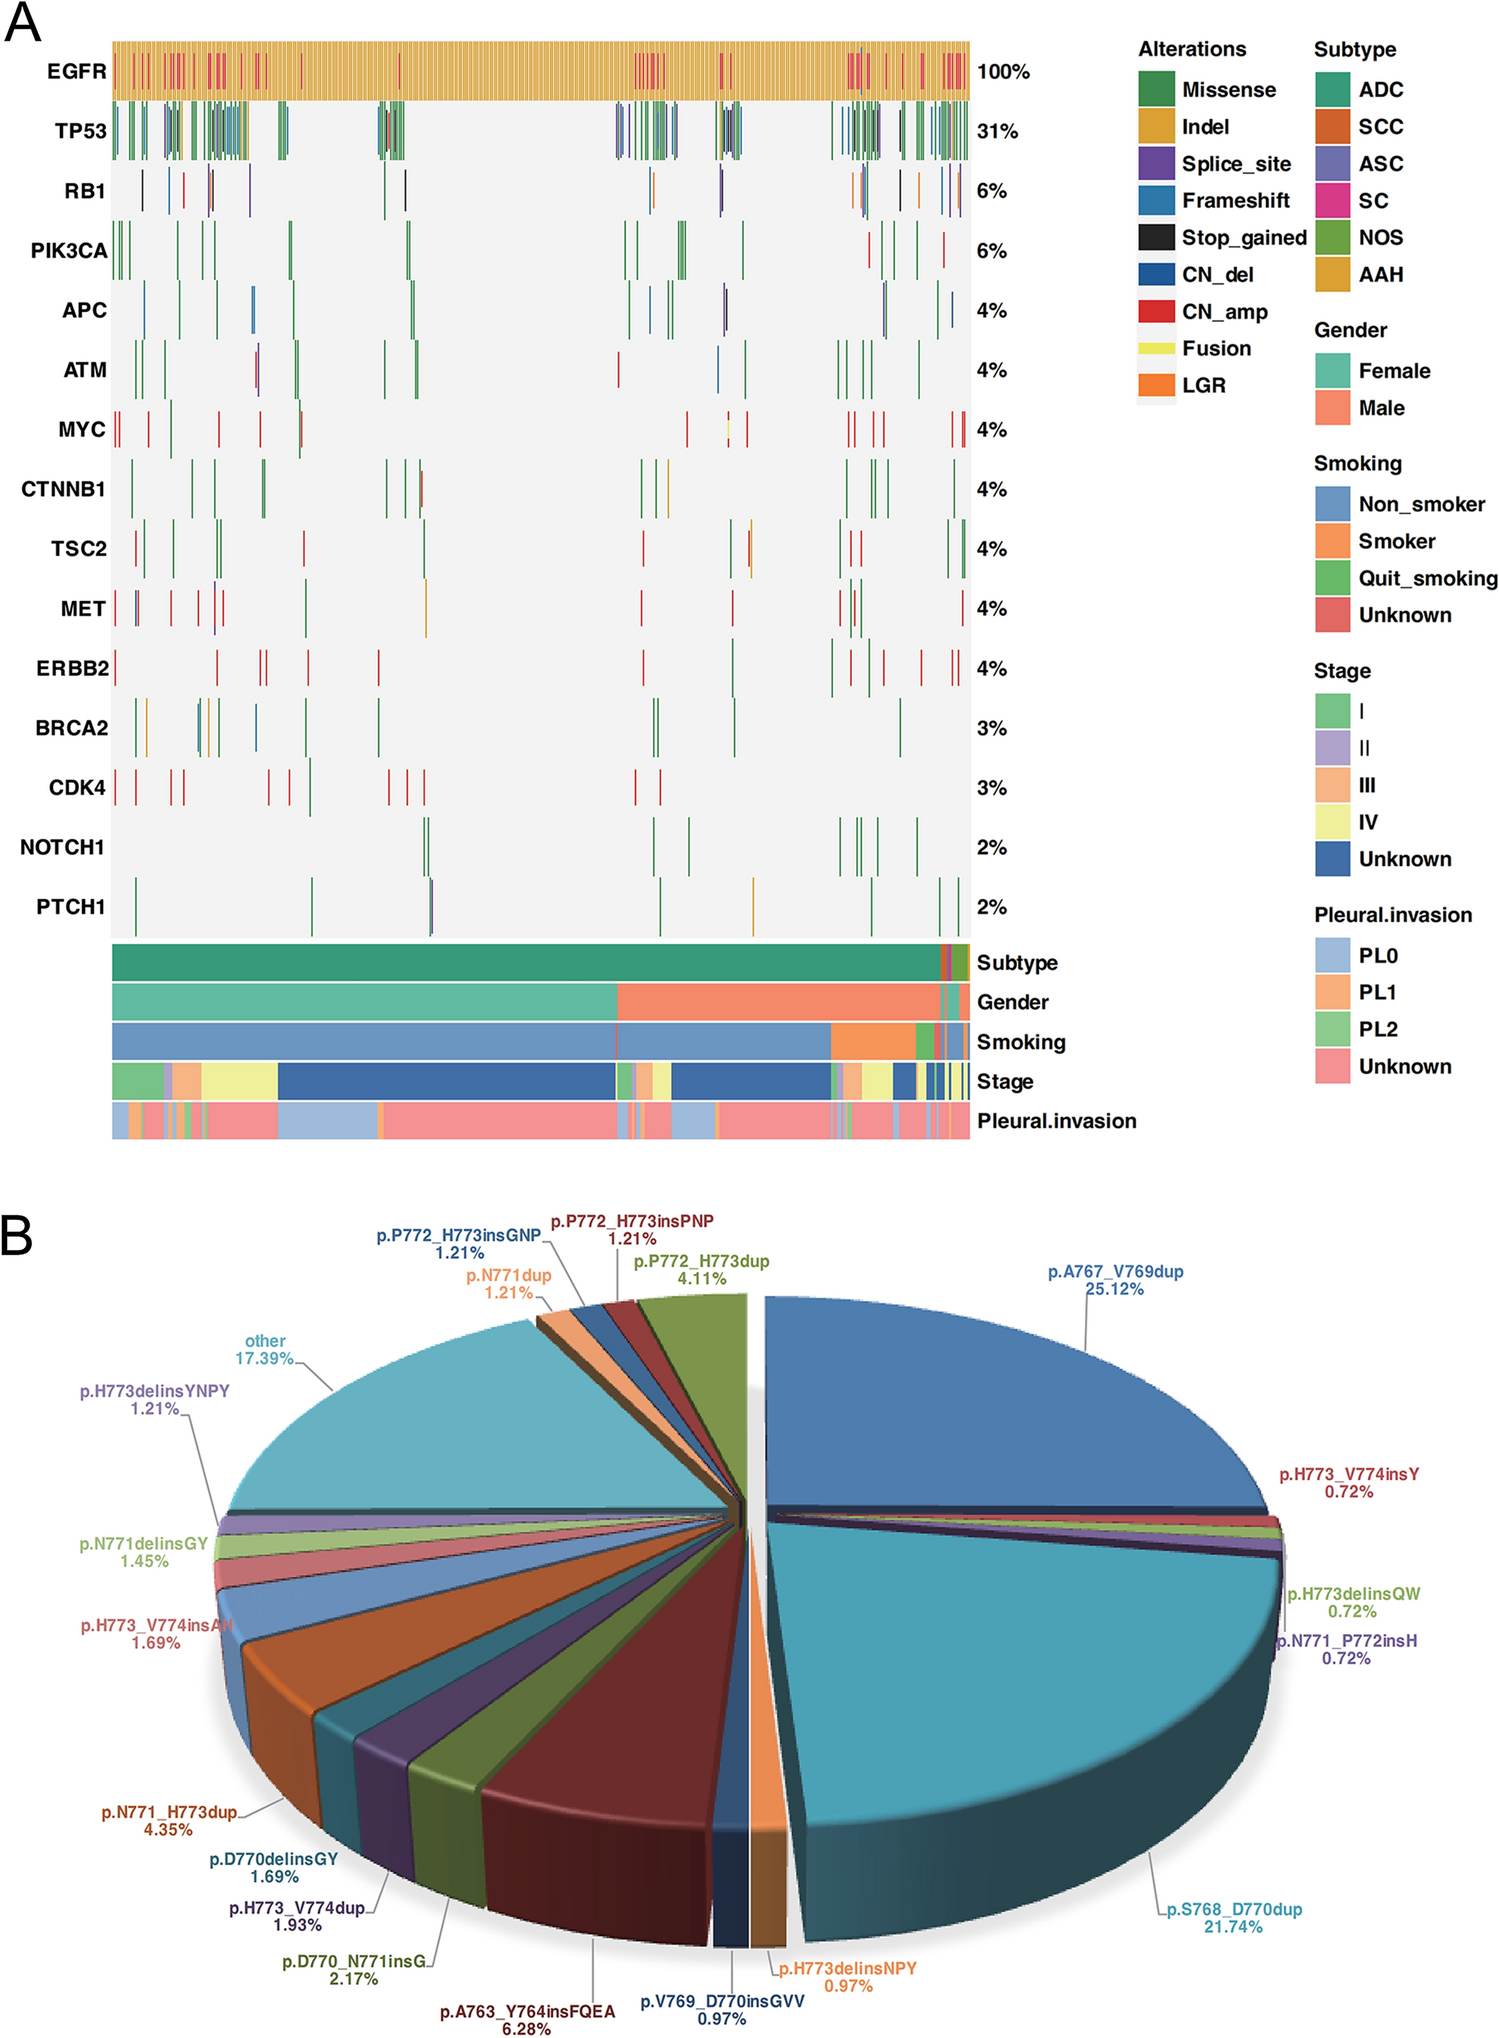 EGFR and ERBB2 Exon 20 Insertion Mutations in Chinese Non-small Cell Lung Cancer Patients: Pathological and Molecular Characterization, and First-Line Systemic Treatment Evaluation